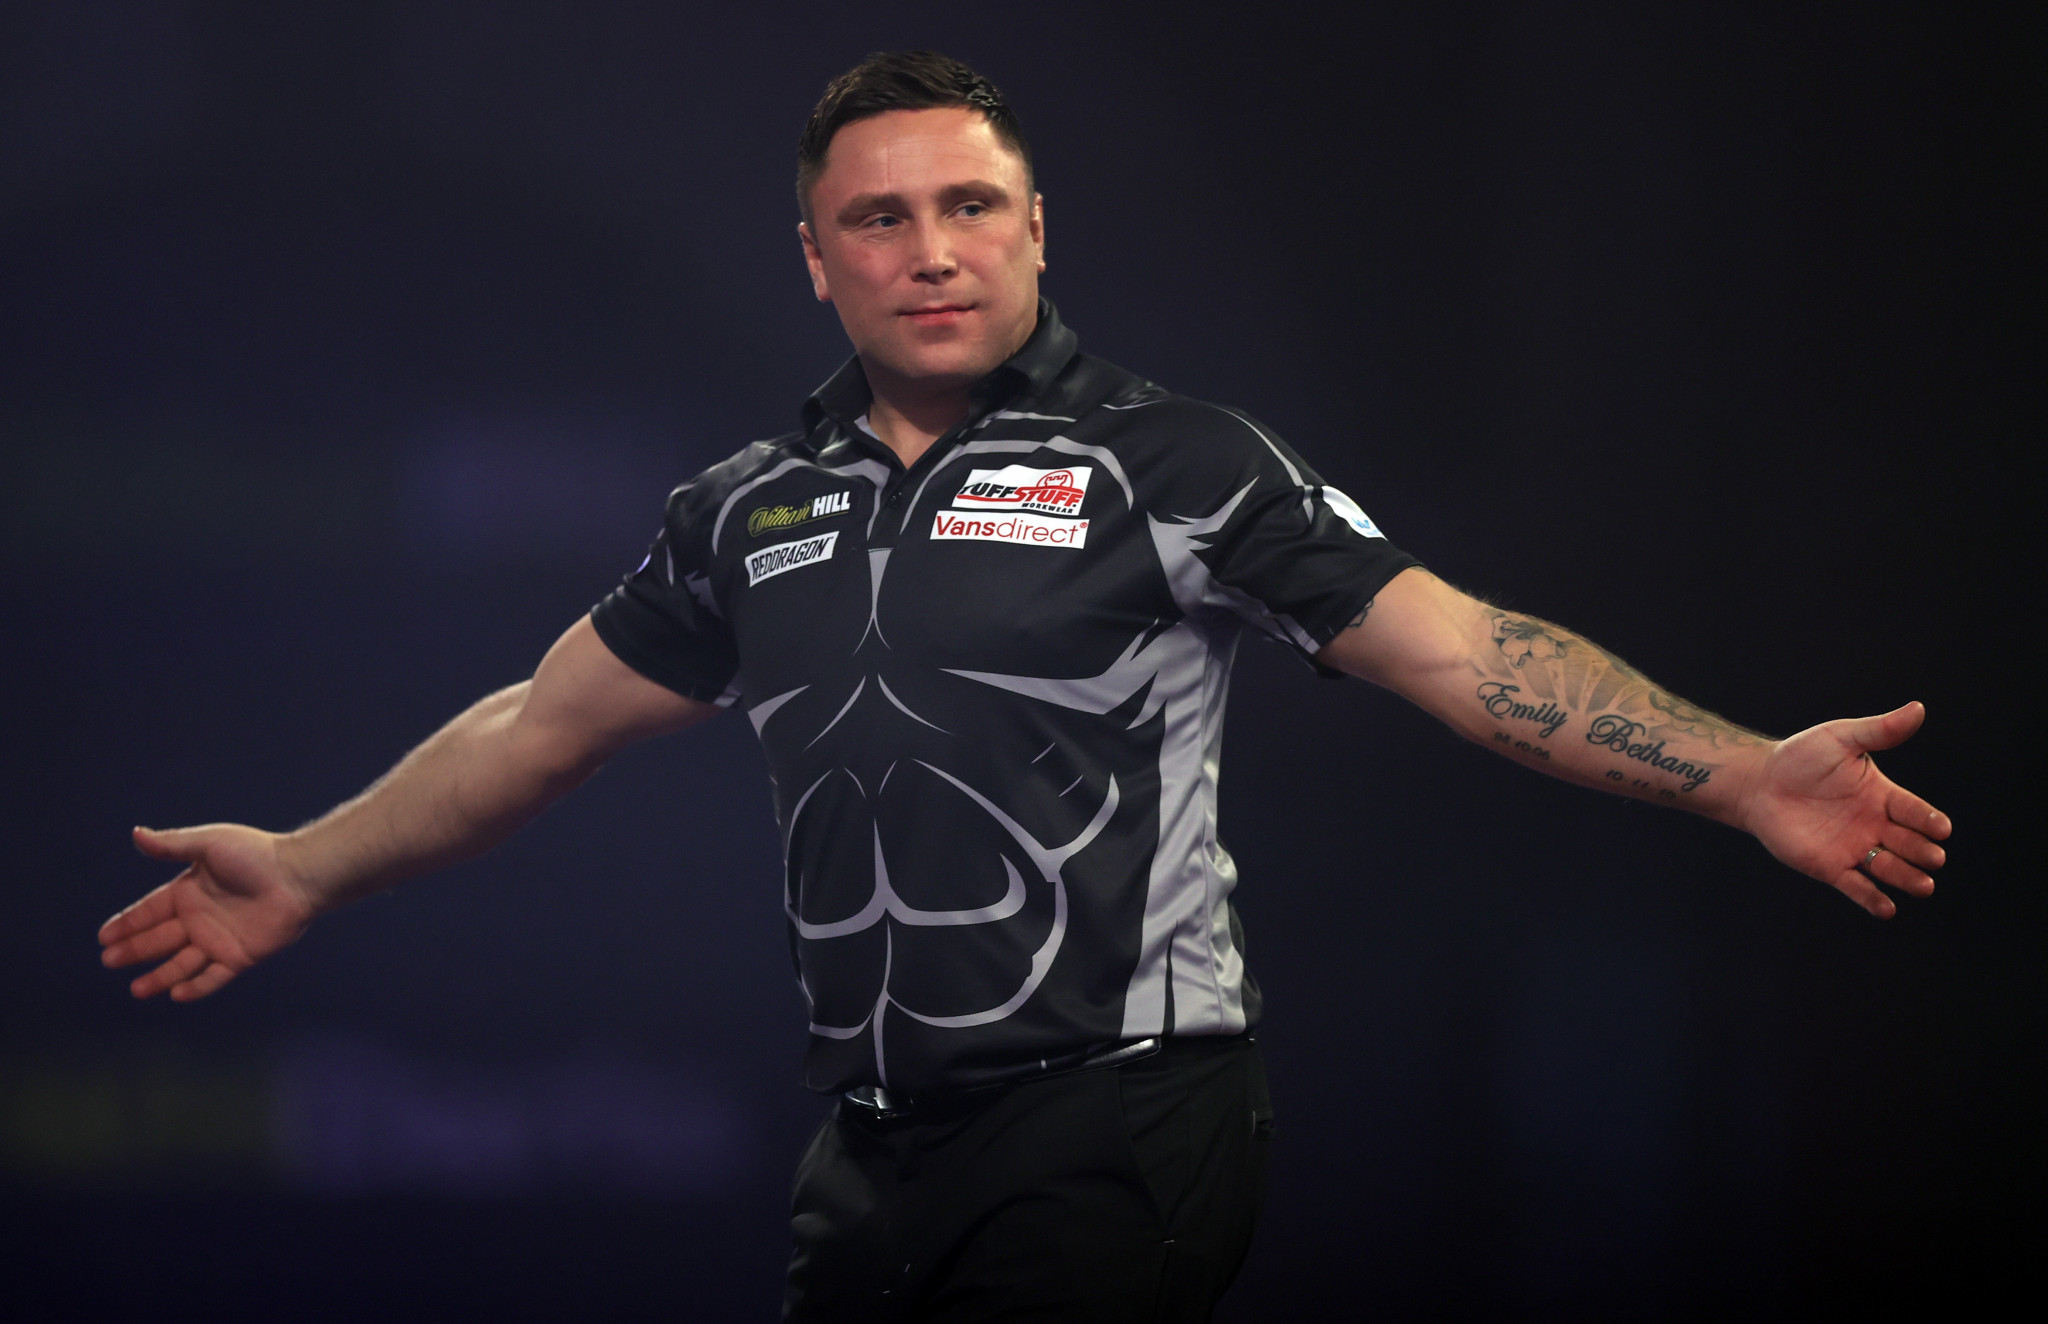 Price to face two-time winner Anderson in PDC World Darts Championship final 